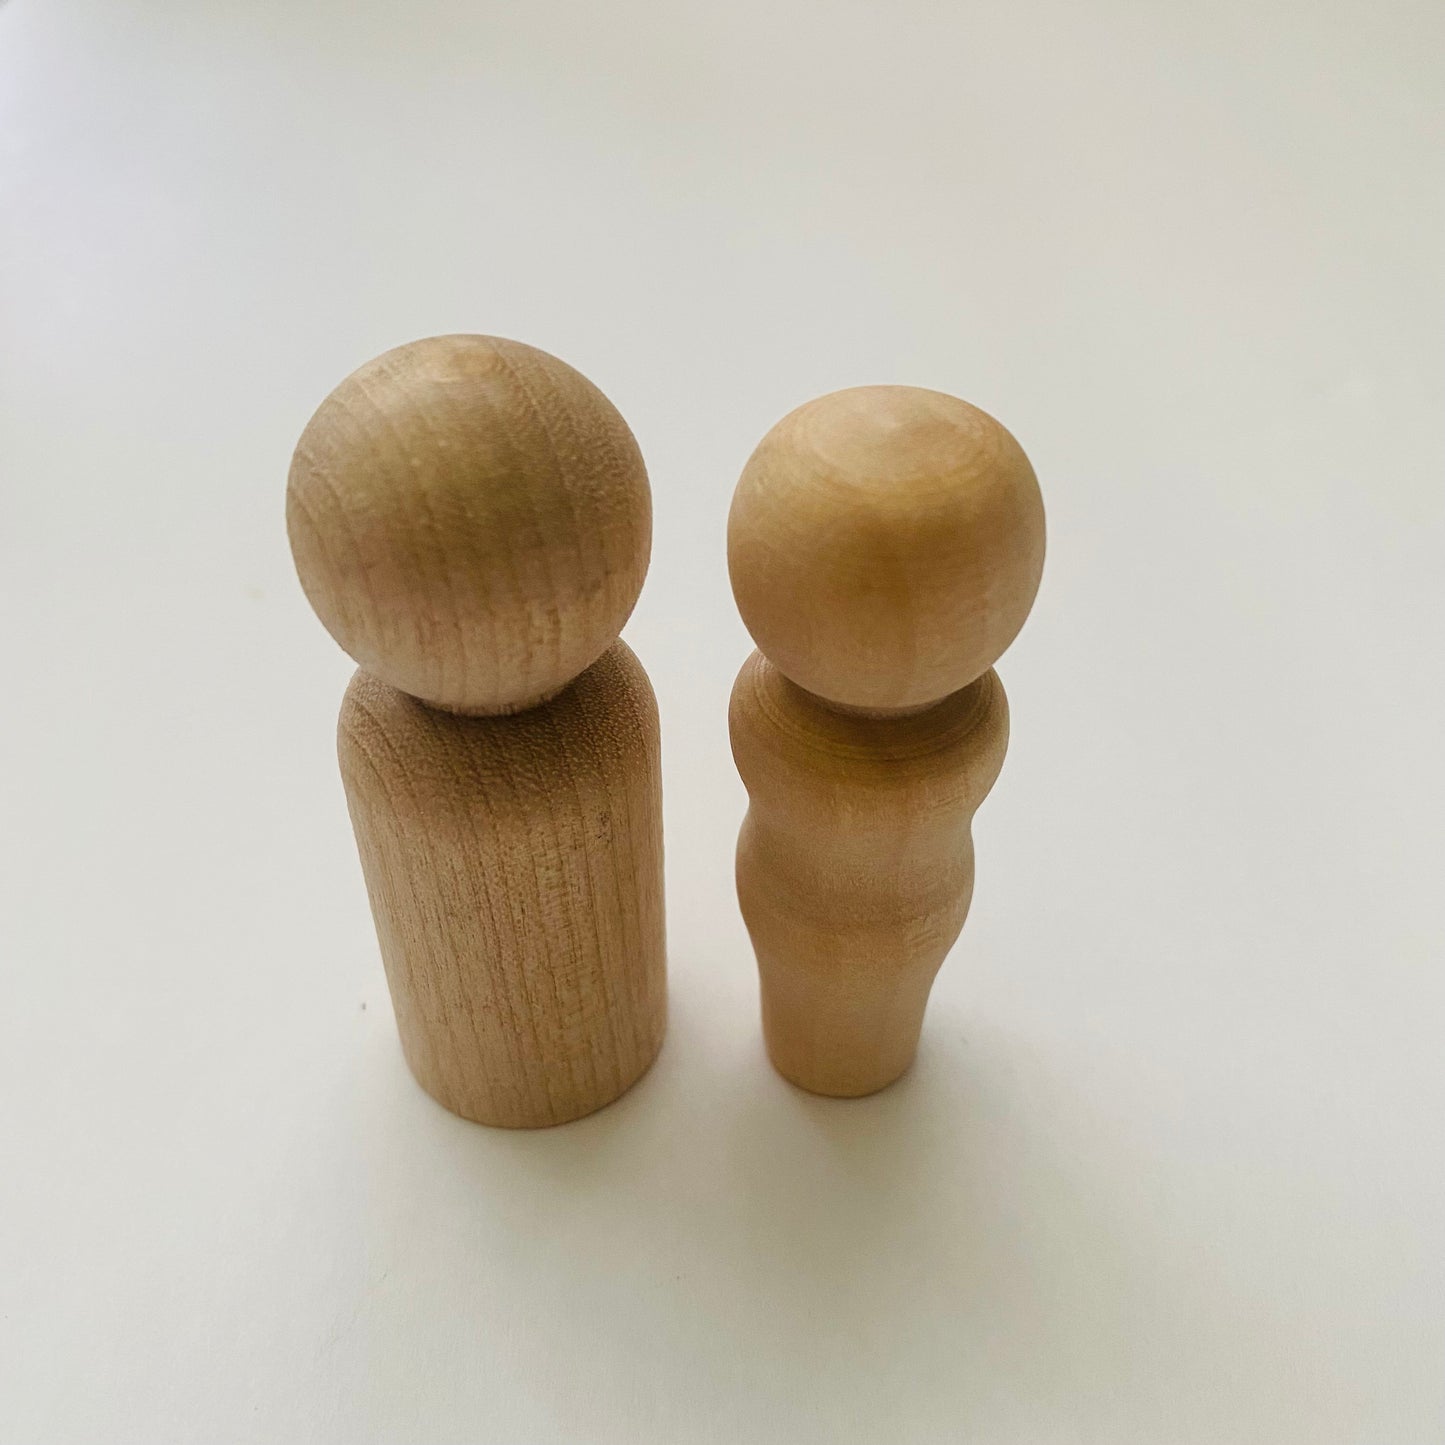 Wooden Peg FIgures Activity Toys Poppy and Pine Creations   